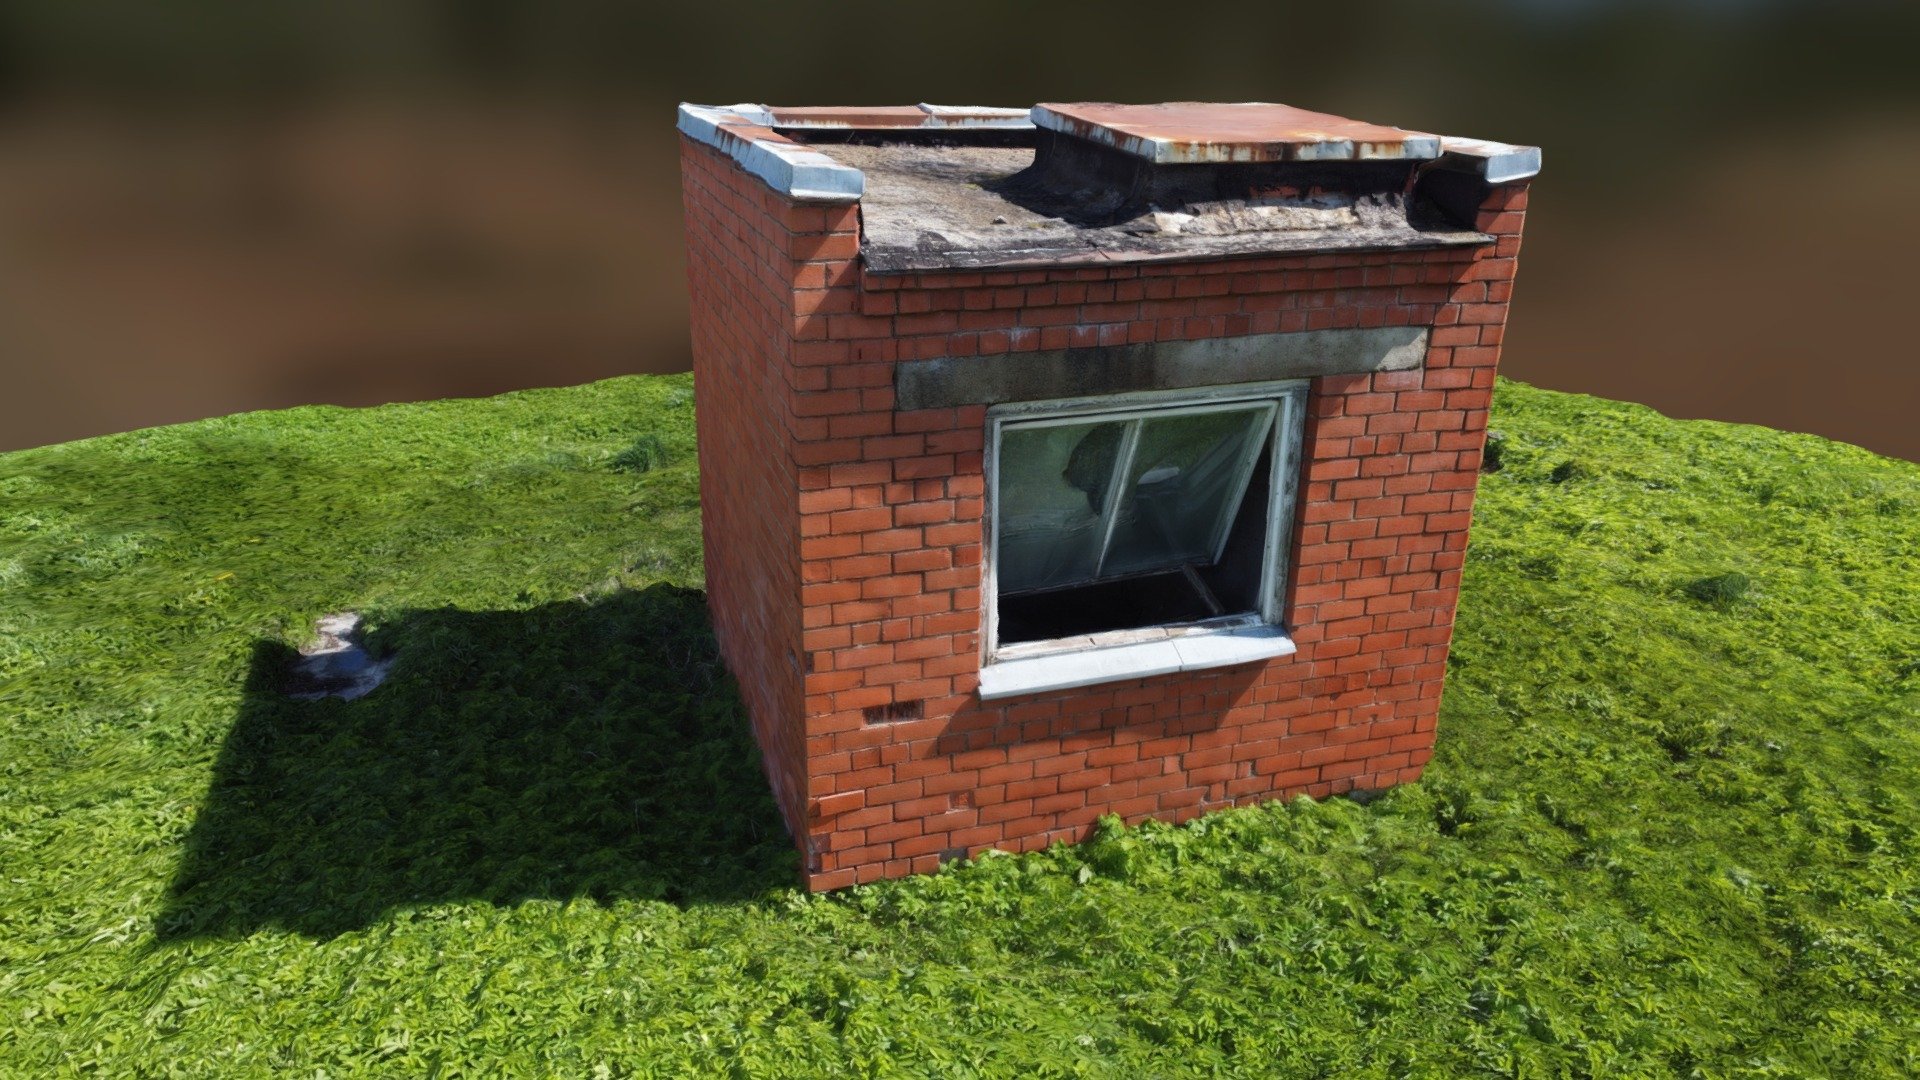 Small, abandoned building made of red bricks.
Open wooden window with glass.
Wooden doors. 
Rusty, metal on roof 3d model